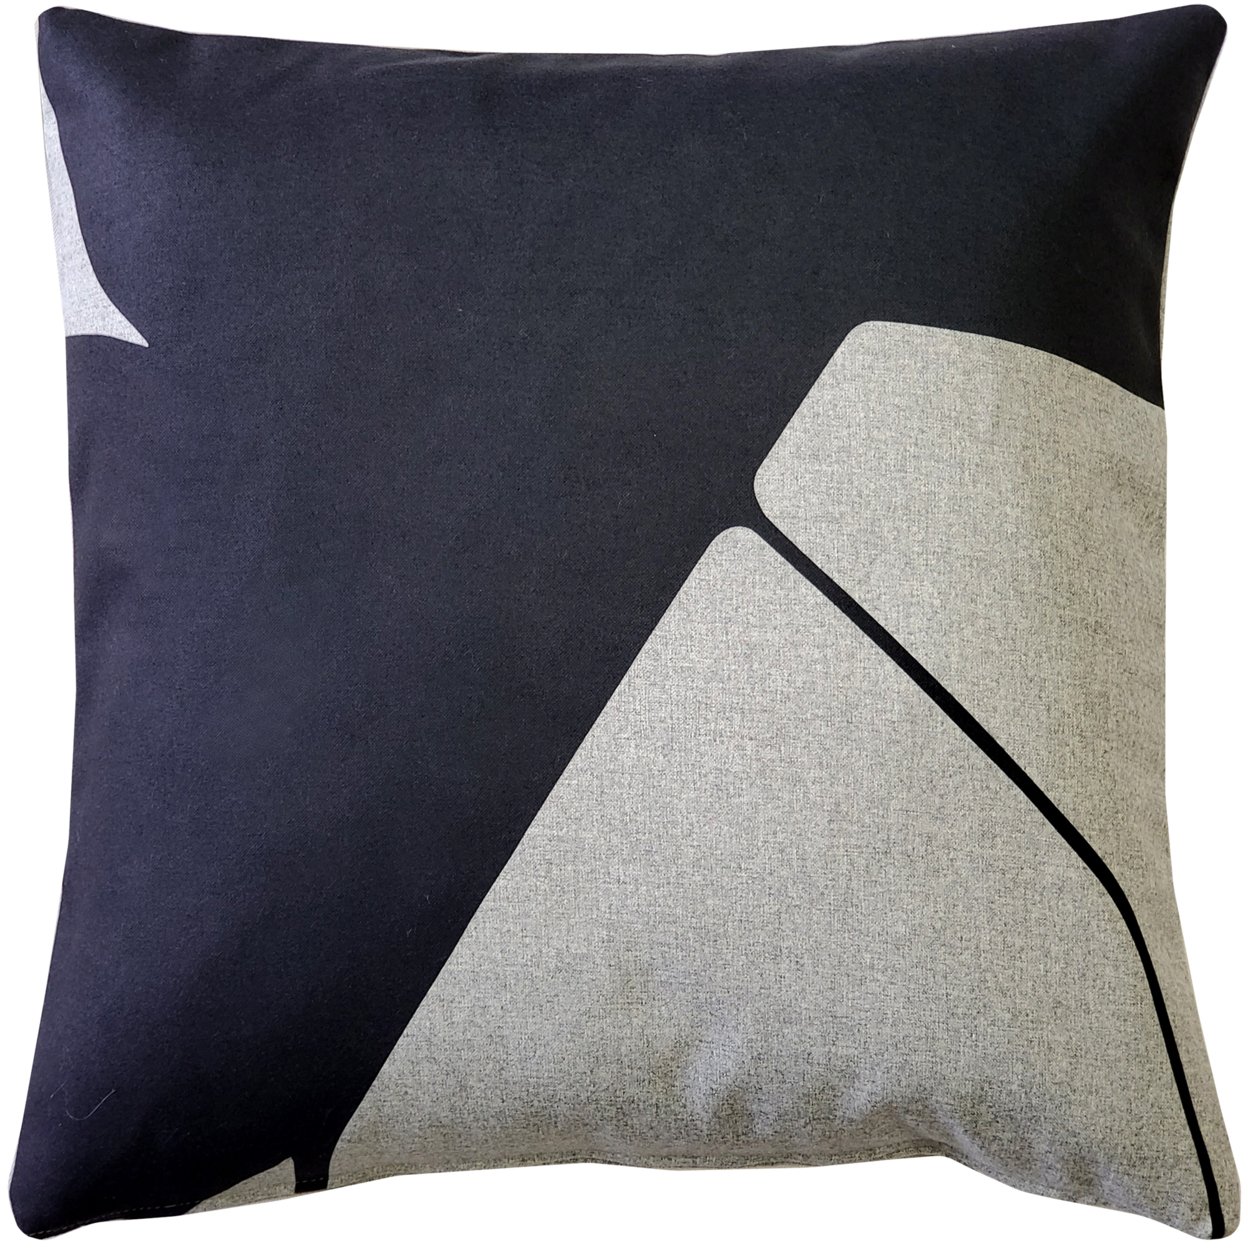 Boketto Charcoal Black Throw Pillow 19x19 Inches Square, Complete Pillow with Polyfill Pillow Insert